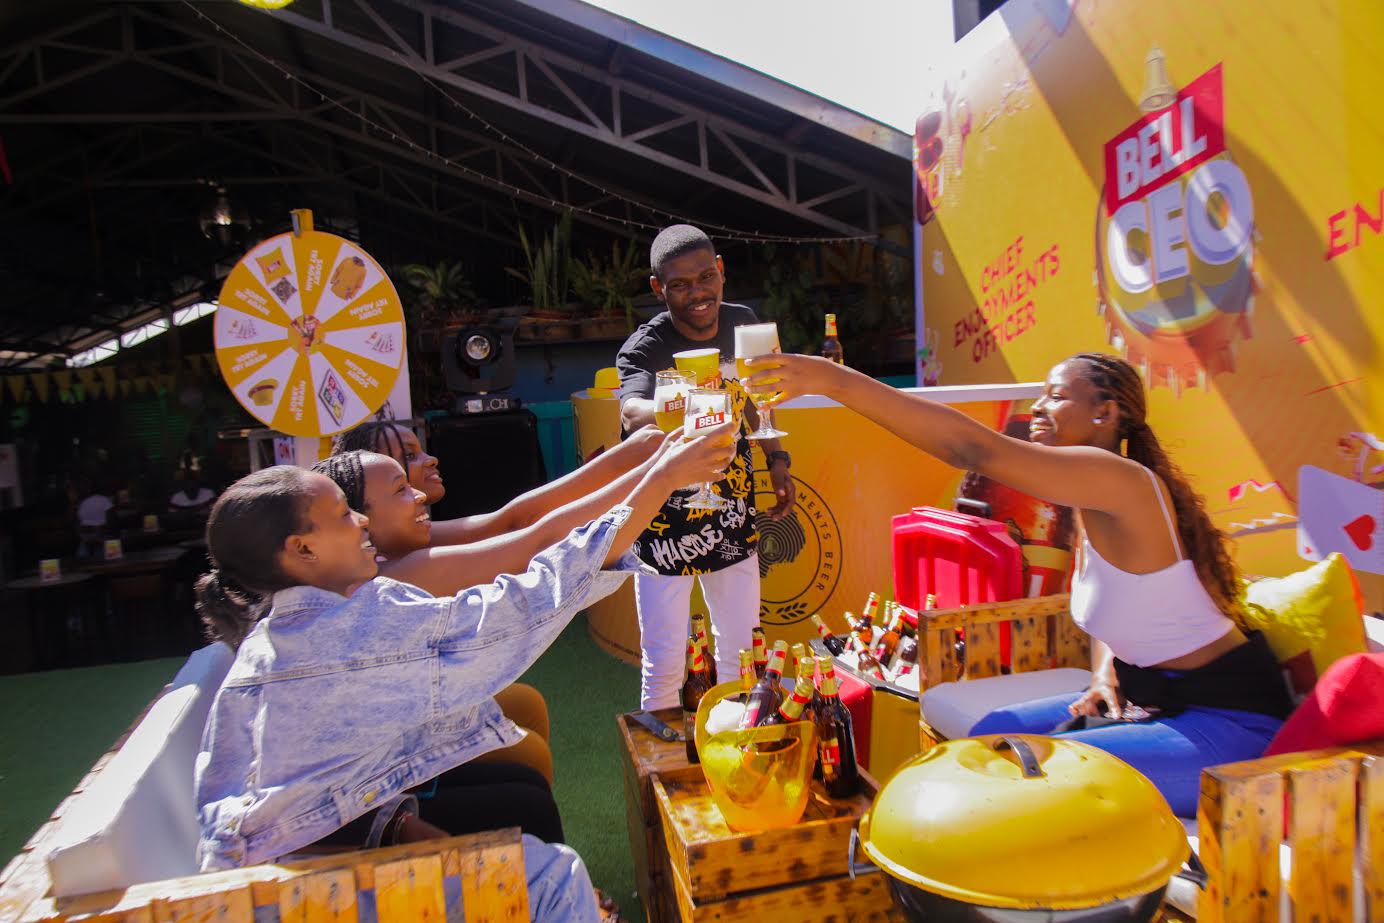 Bell Lager throws debut enjoyment pop-up during search for CEO